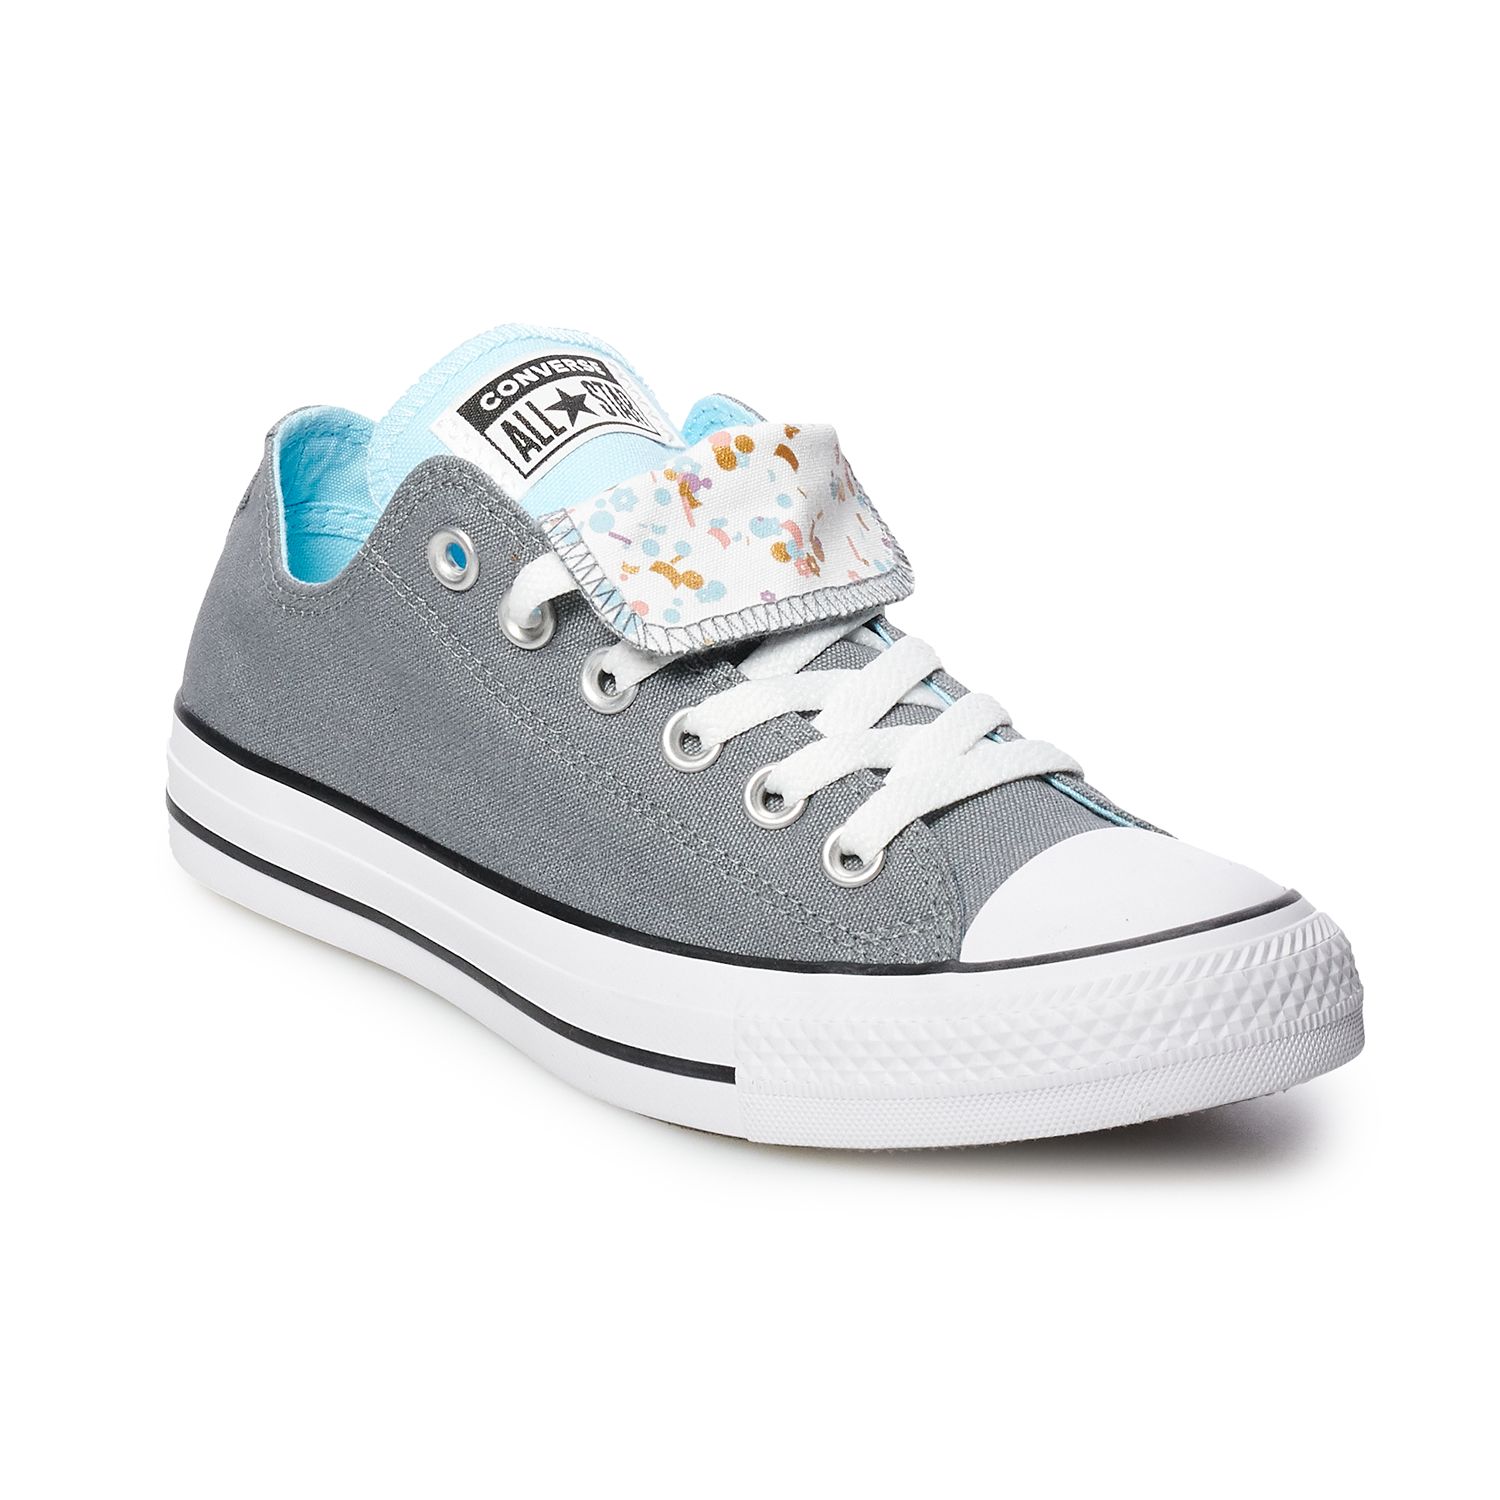 converse all star double tongue womens